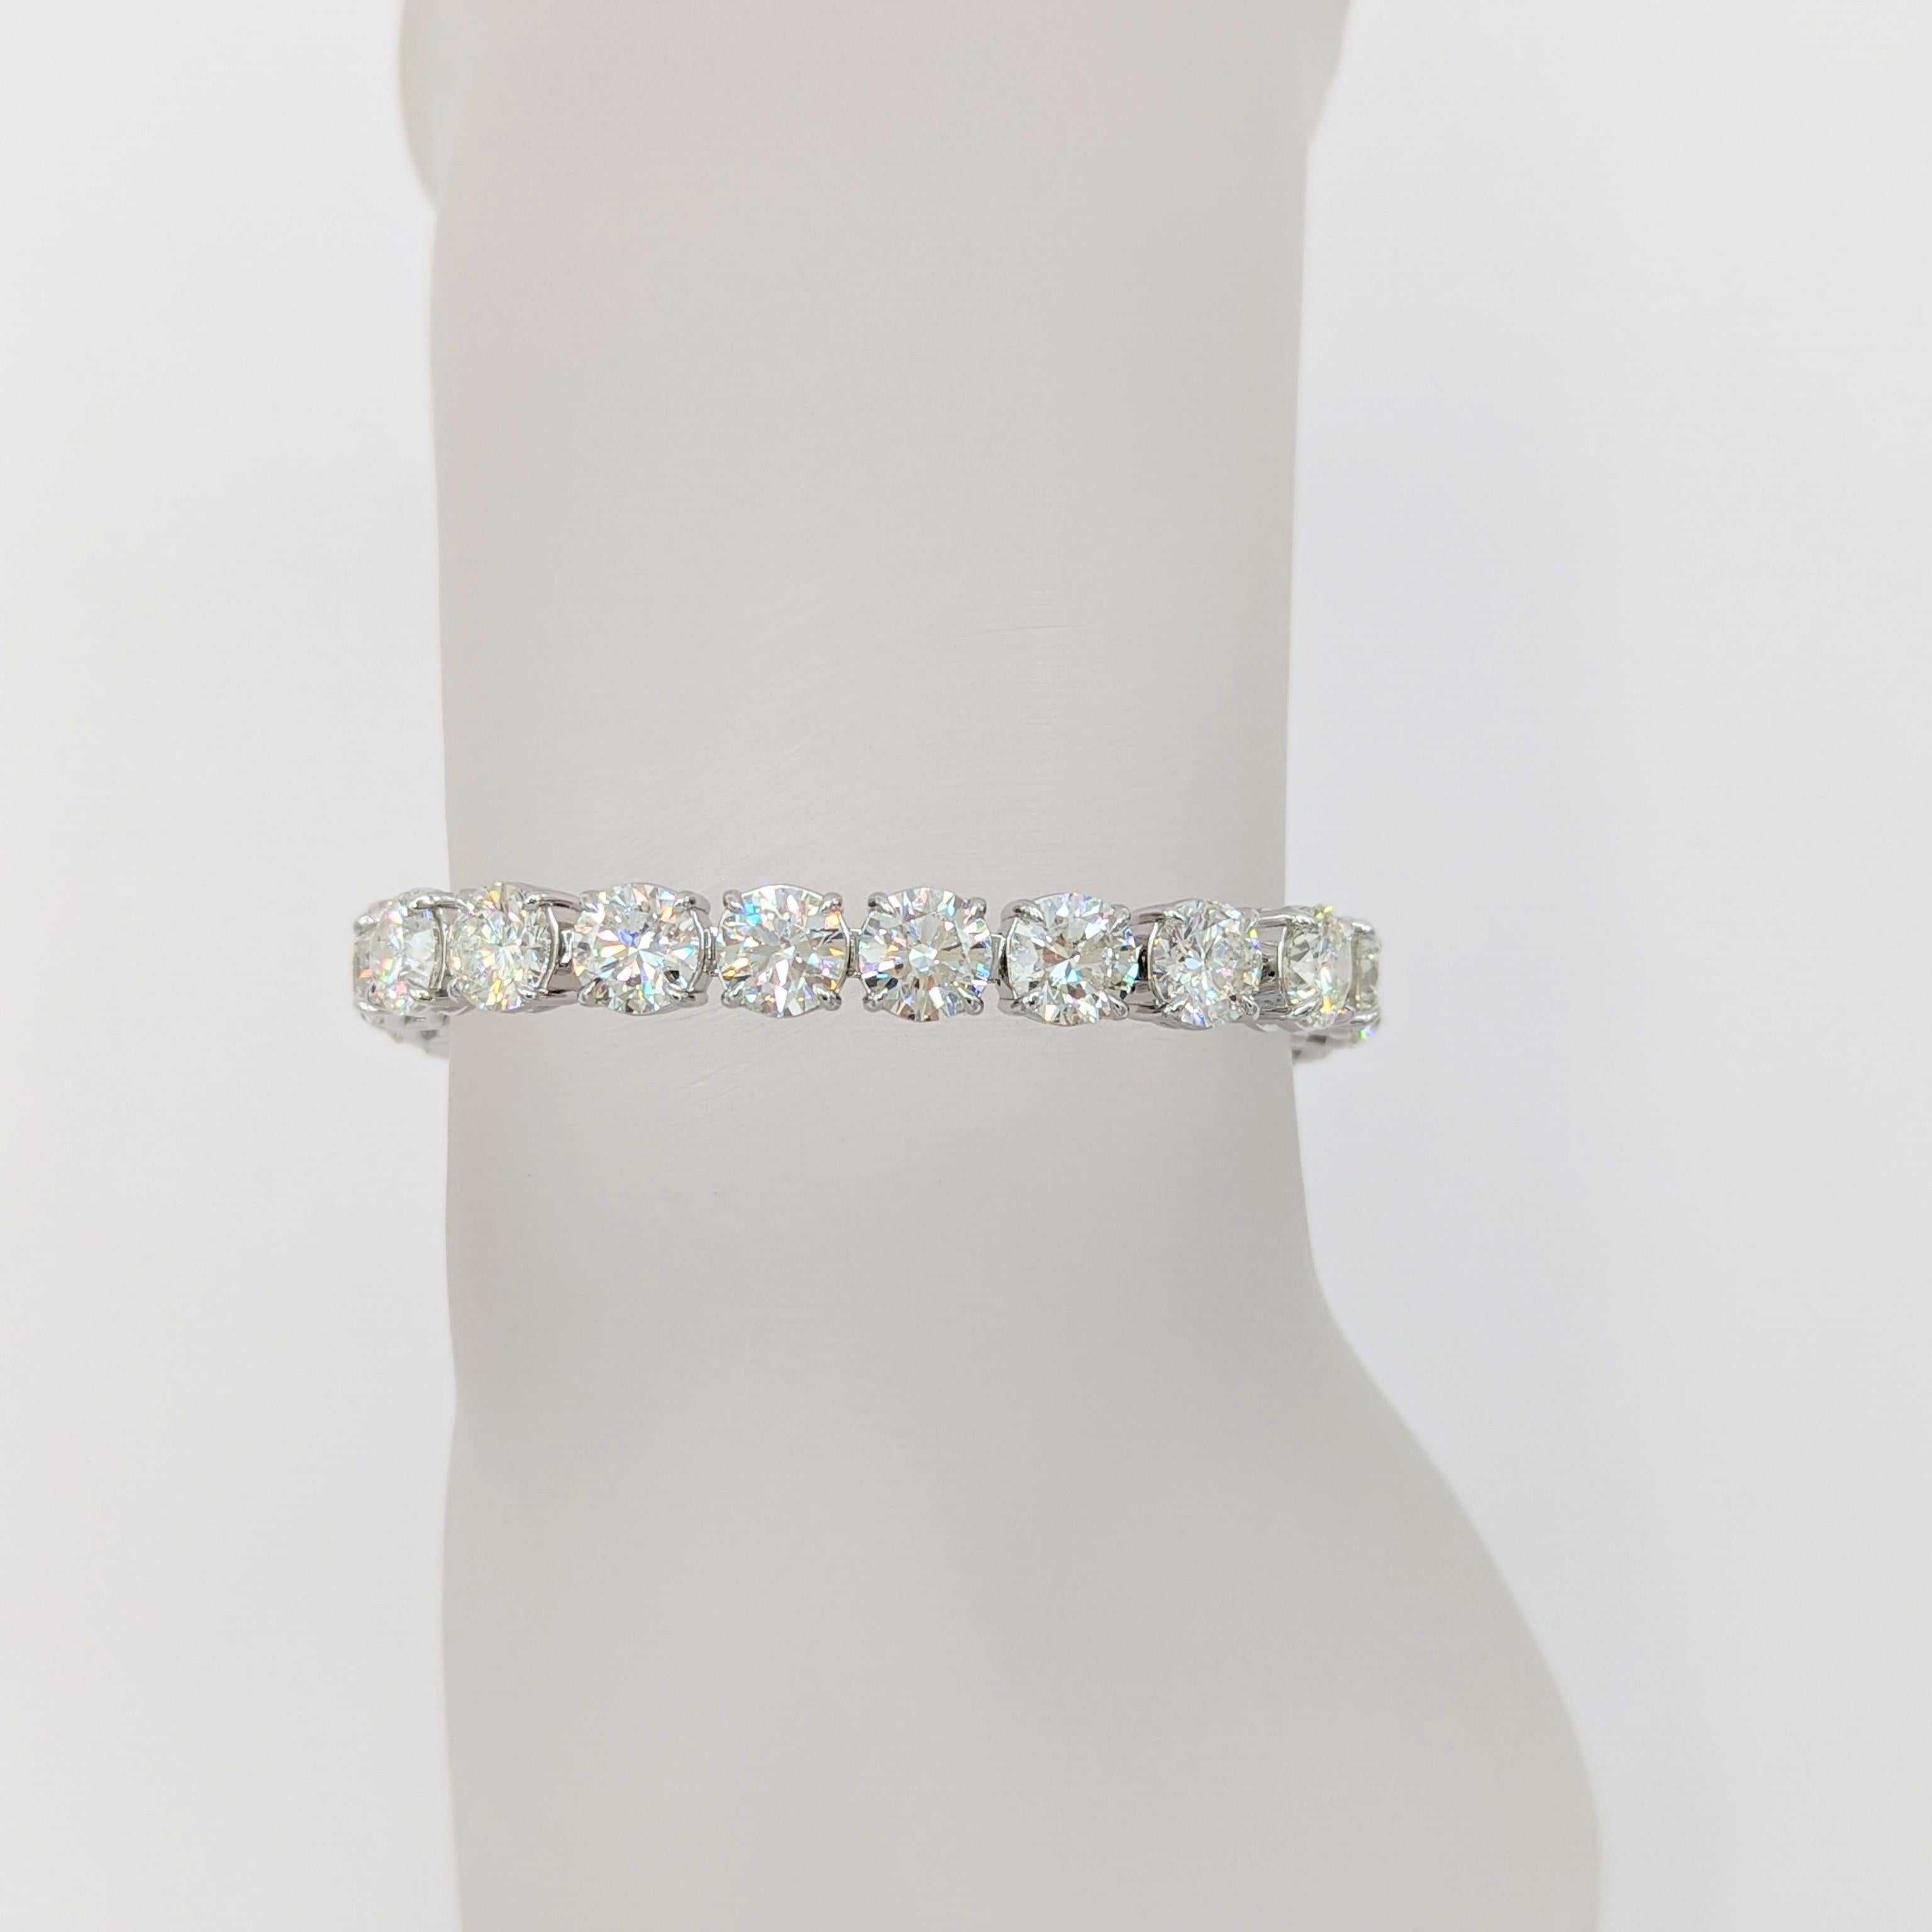 Gorgeous 26.04 ct. white diamond round tennis bracelet with 26 diamonds that are I-J color and SI1-SI2 clarity.  Handmade in platinum.  Length is 7